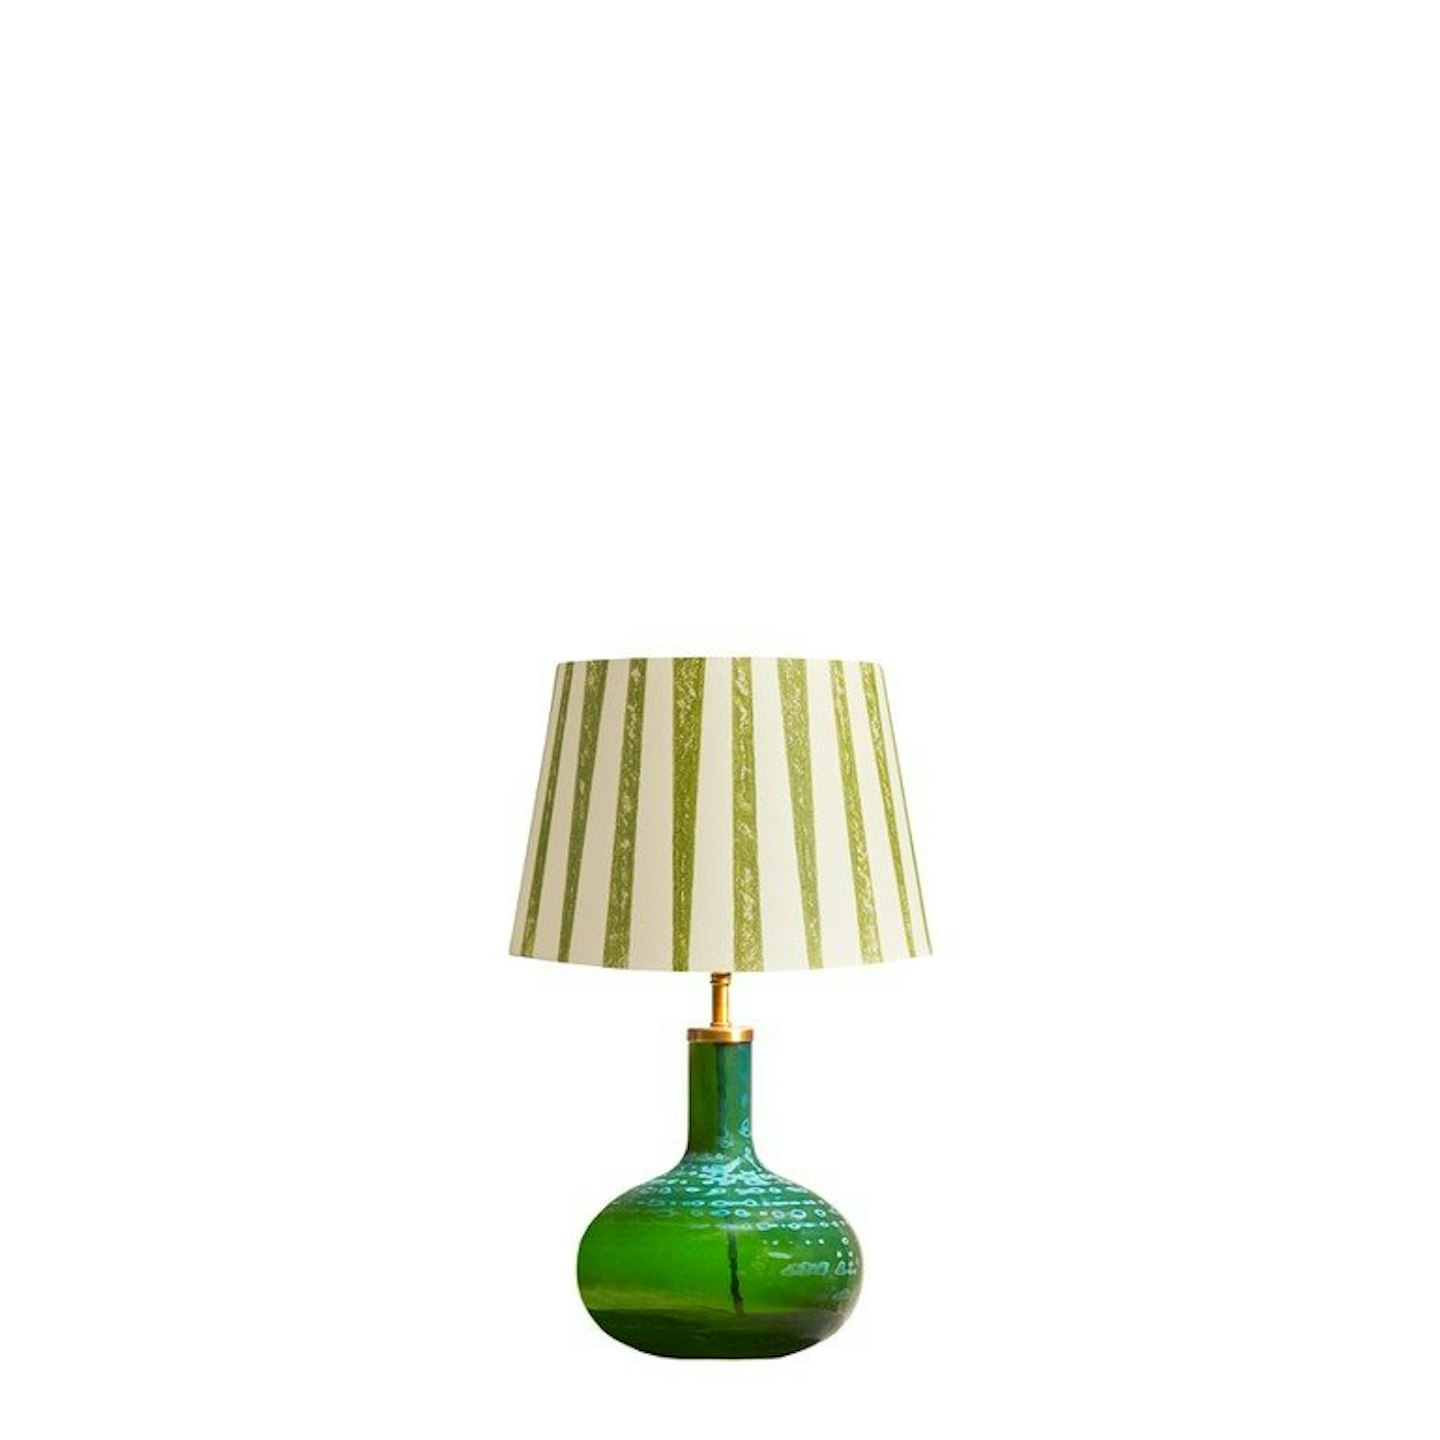 Pooky, Gruber table lamp, £178